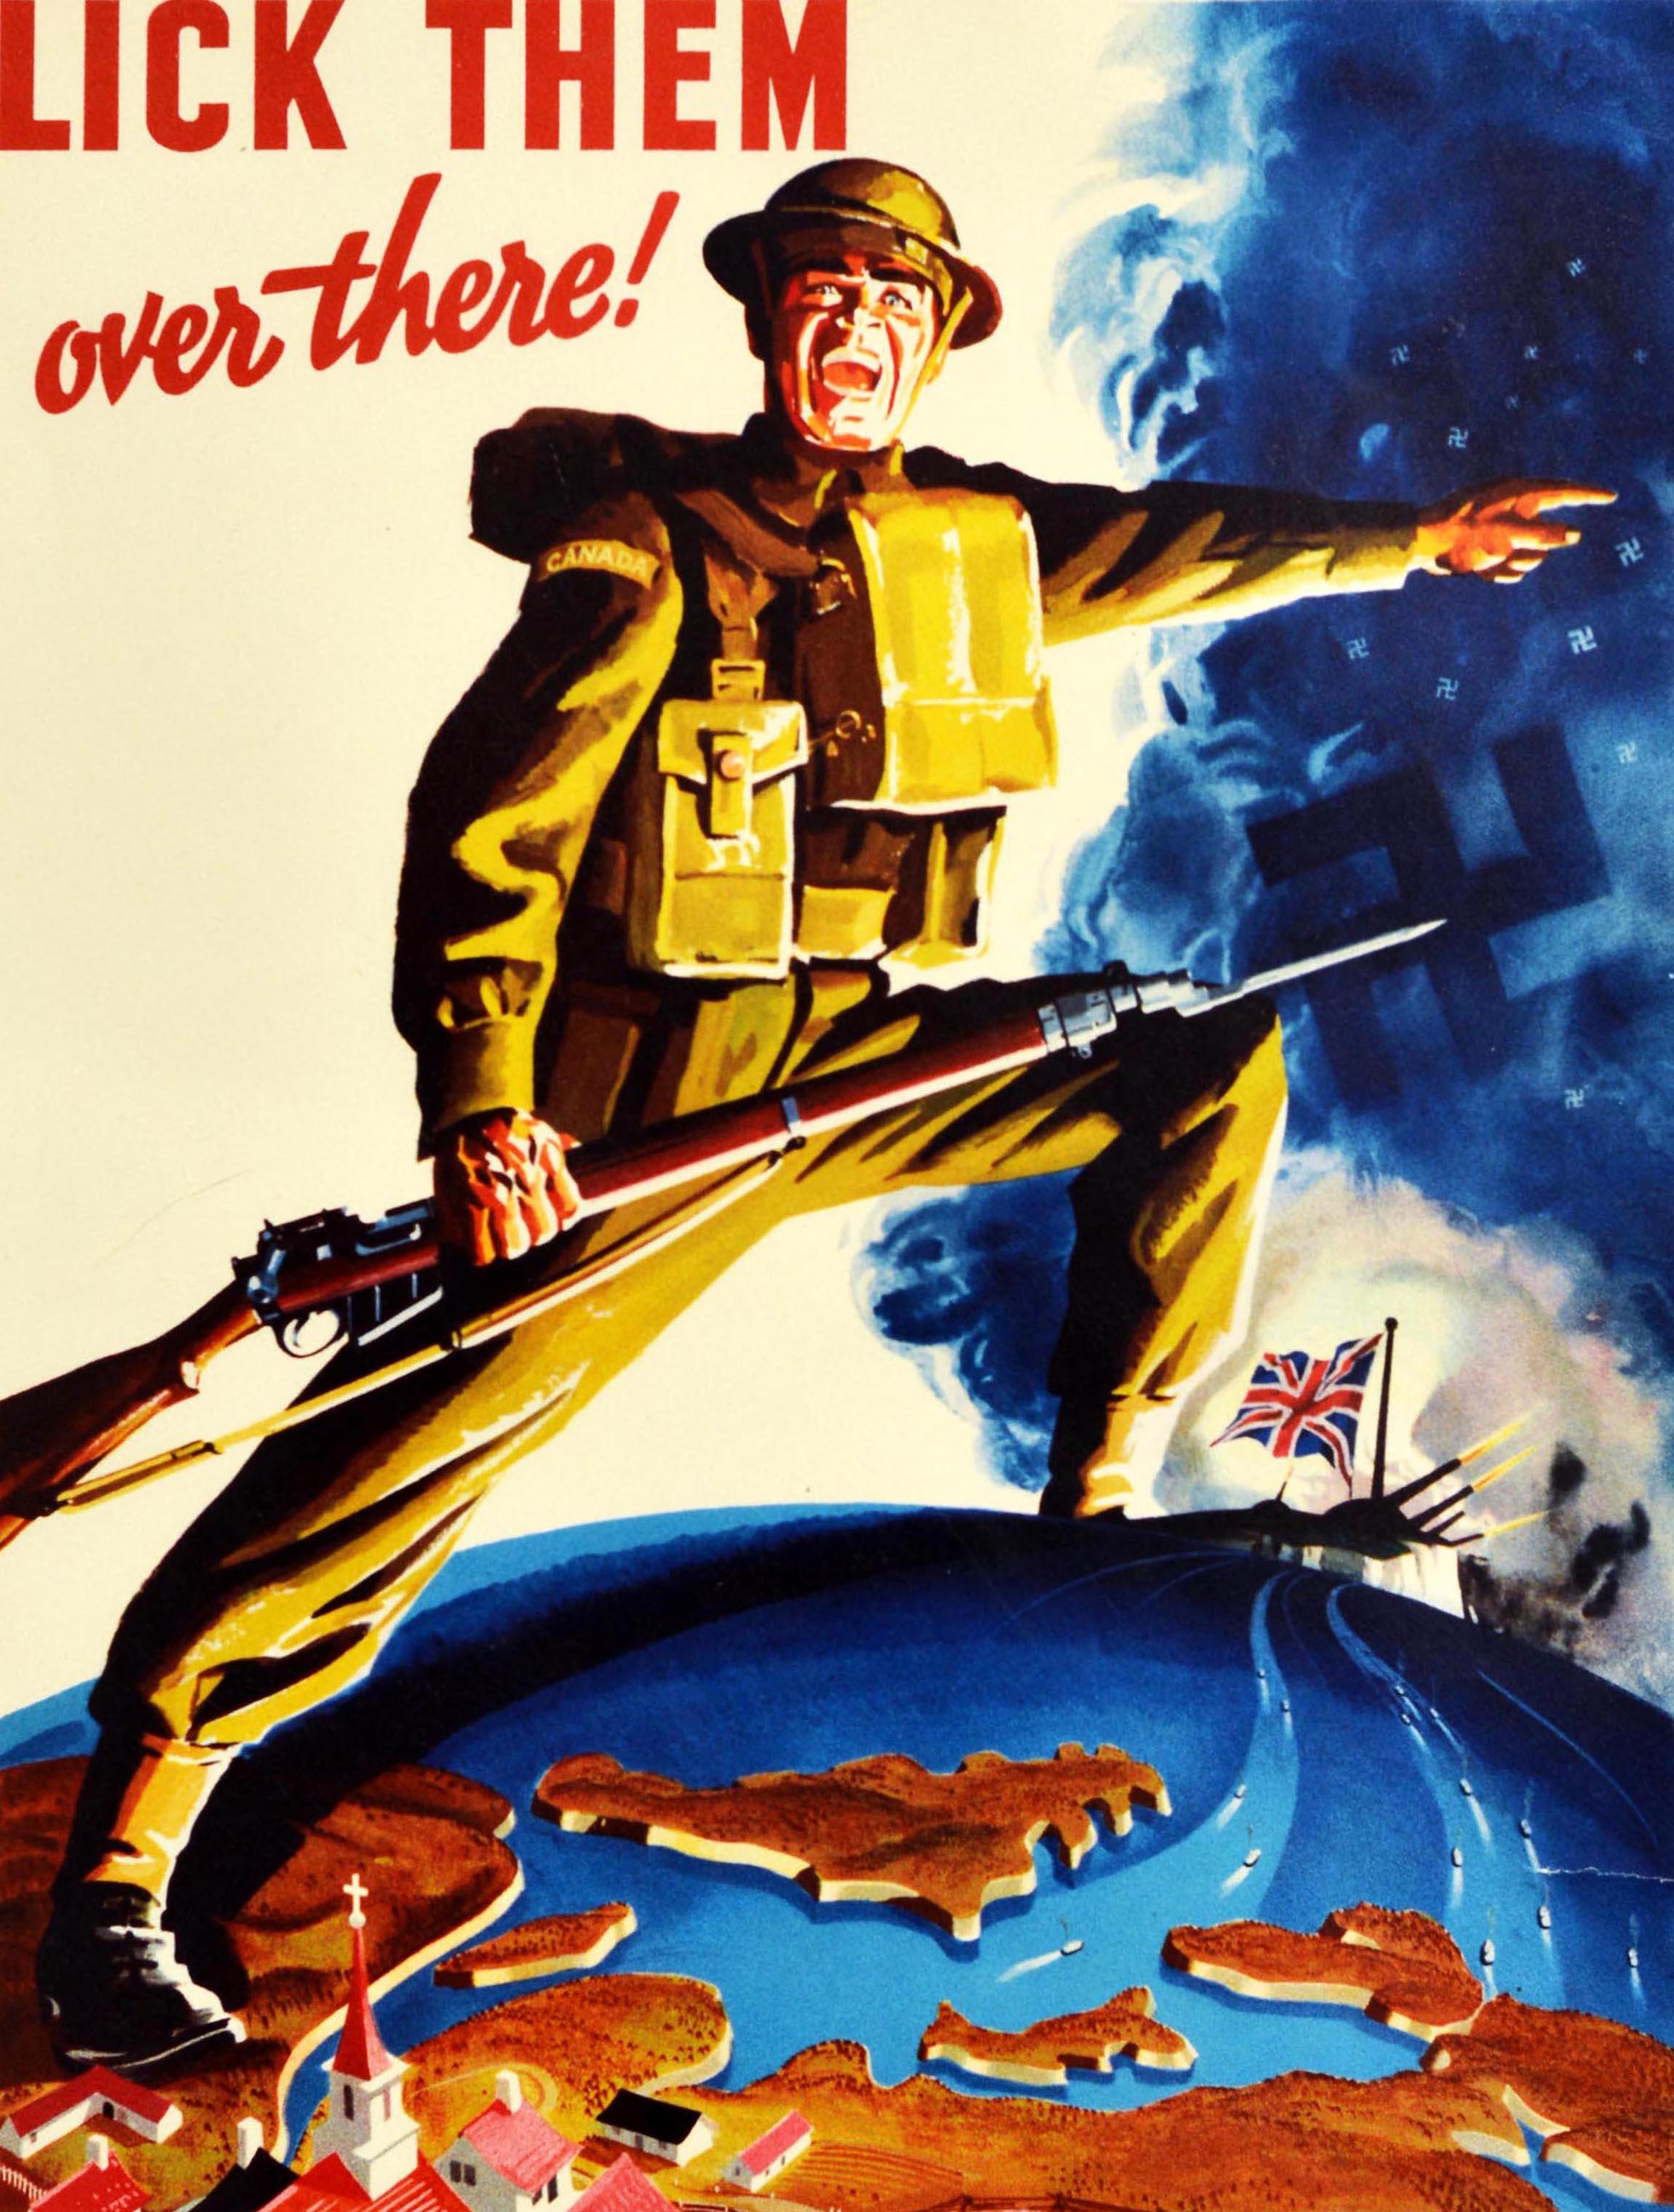 Original Vintage World War Two Poster Lick Them Over There WWII Canada Soldier - Print by Unknown